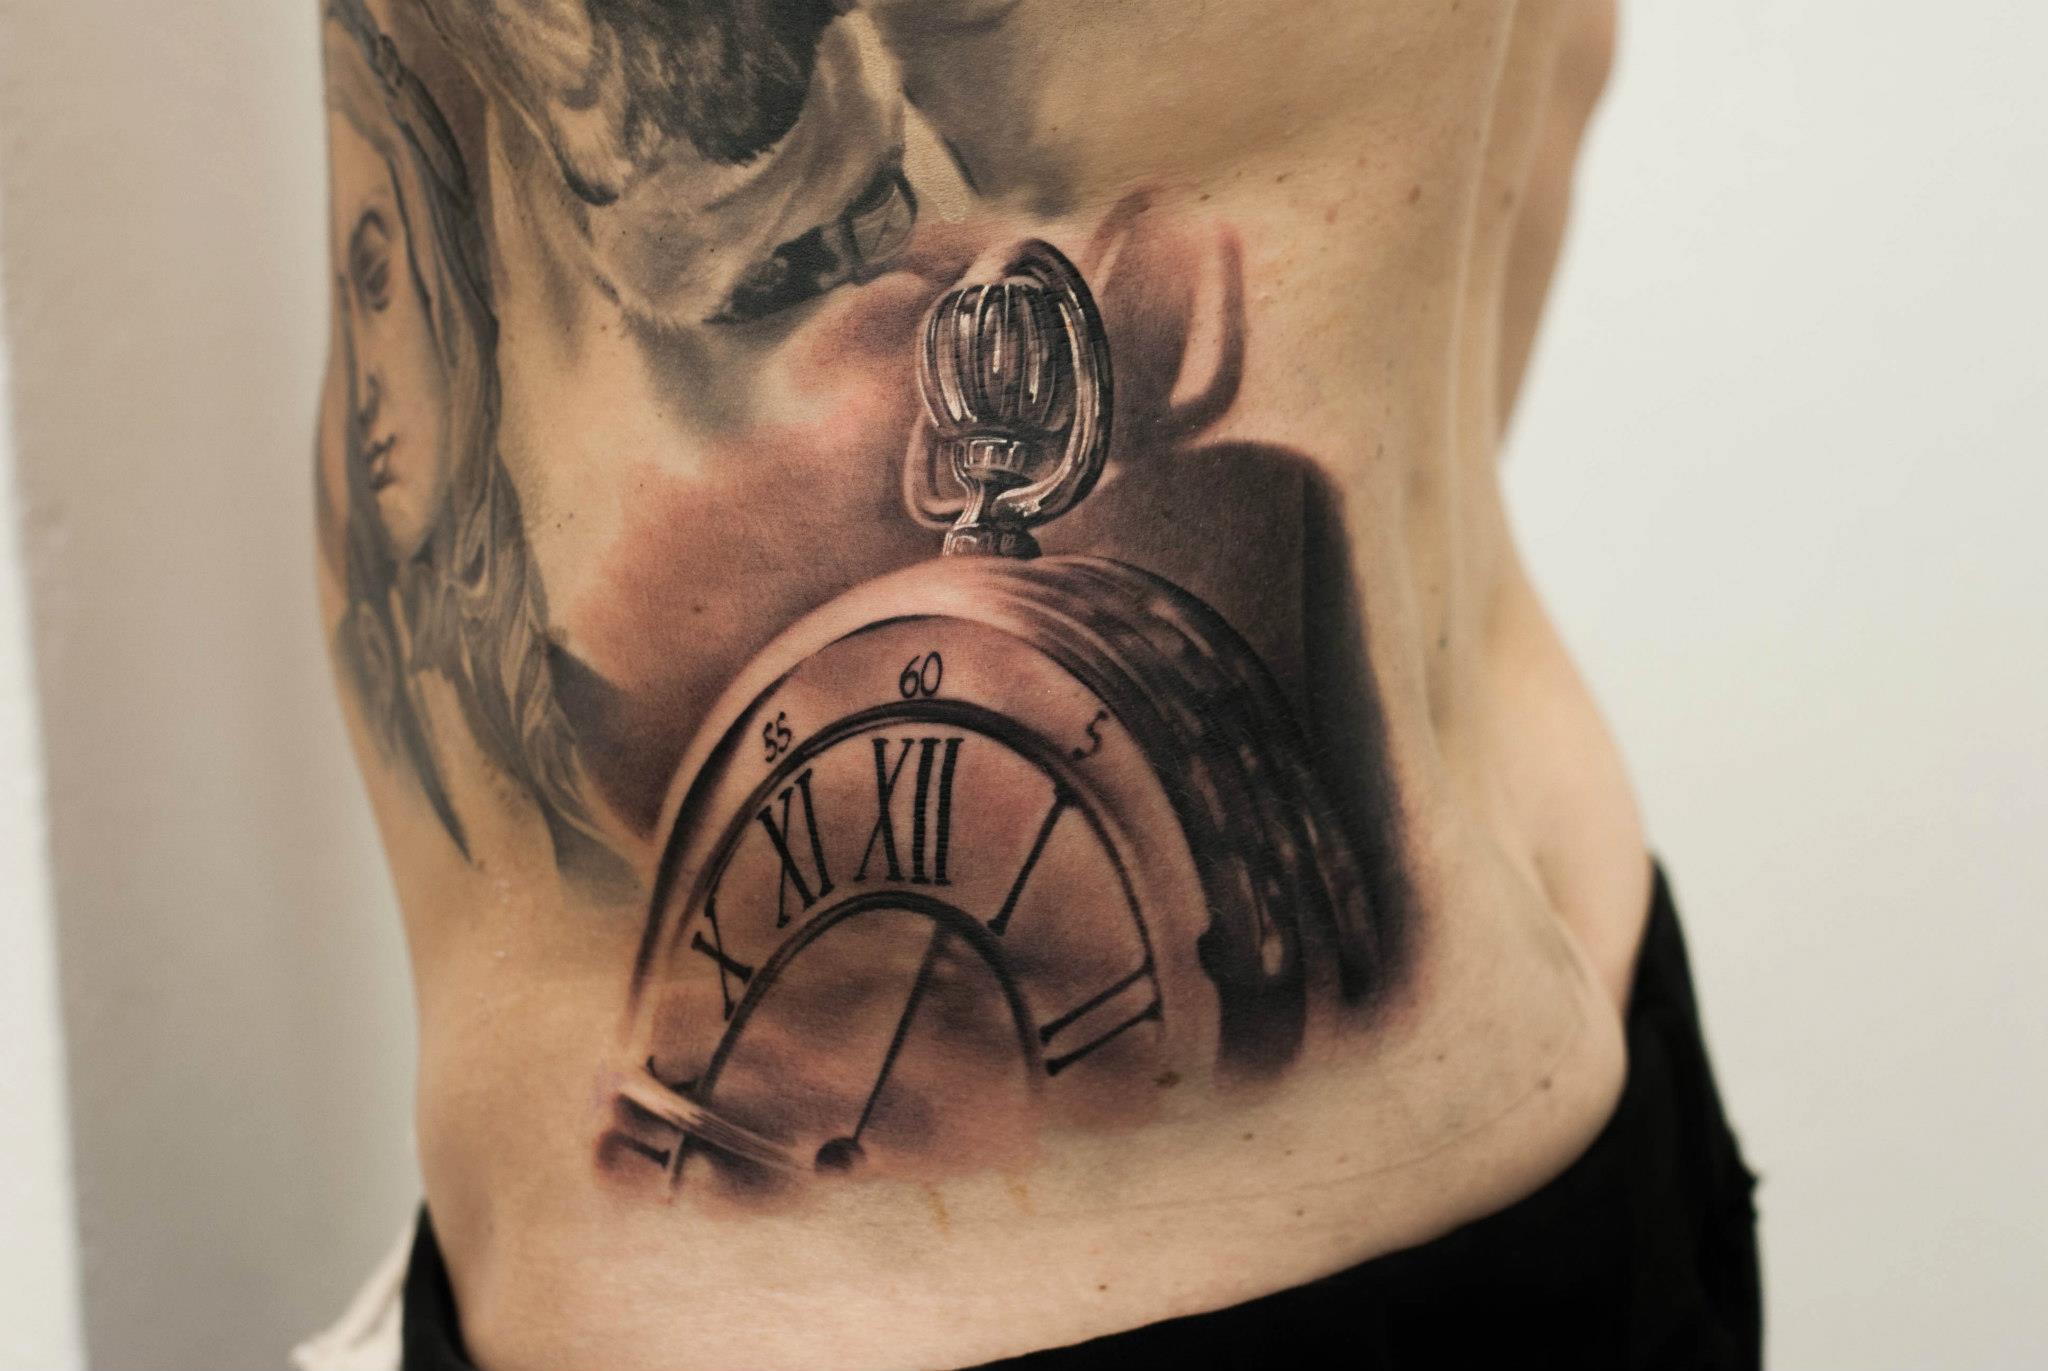 Pocket watch tattoo on the hip